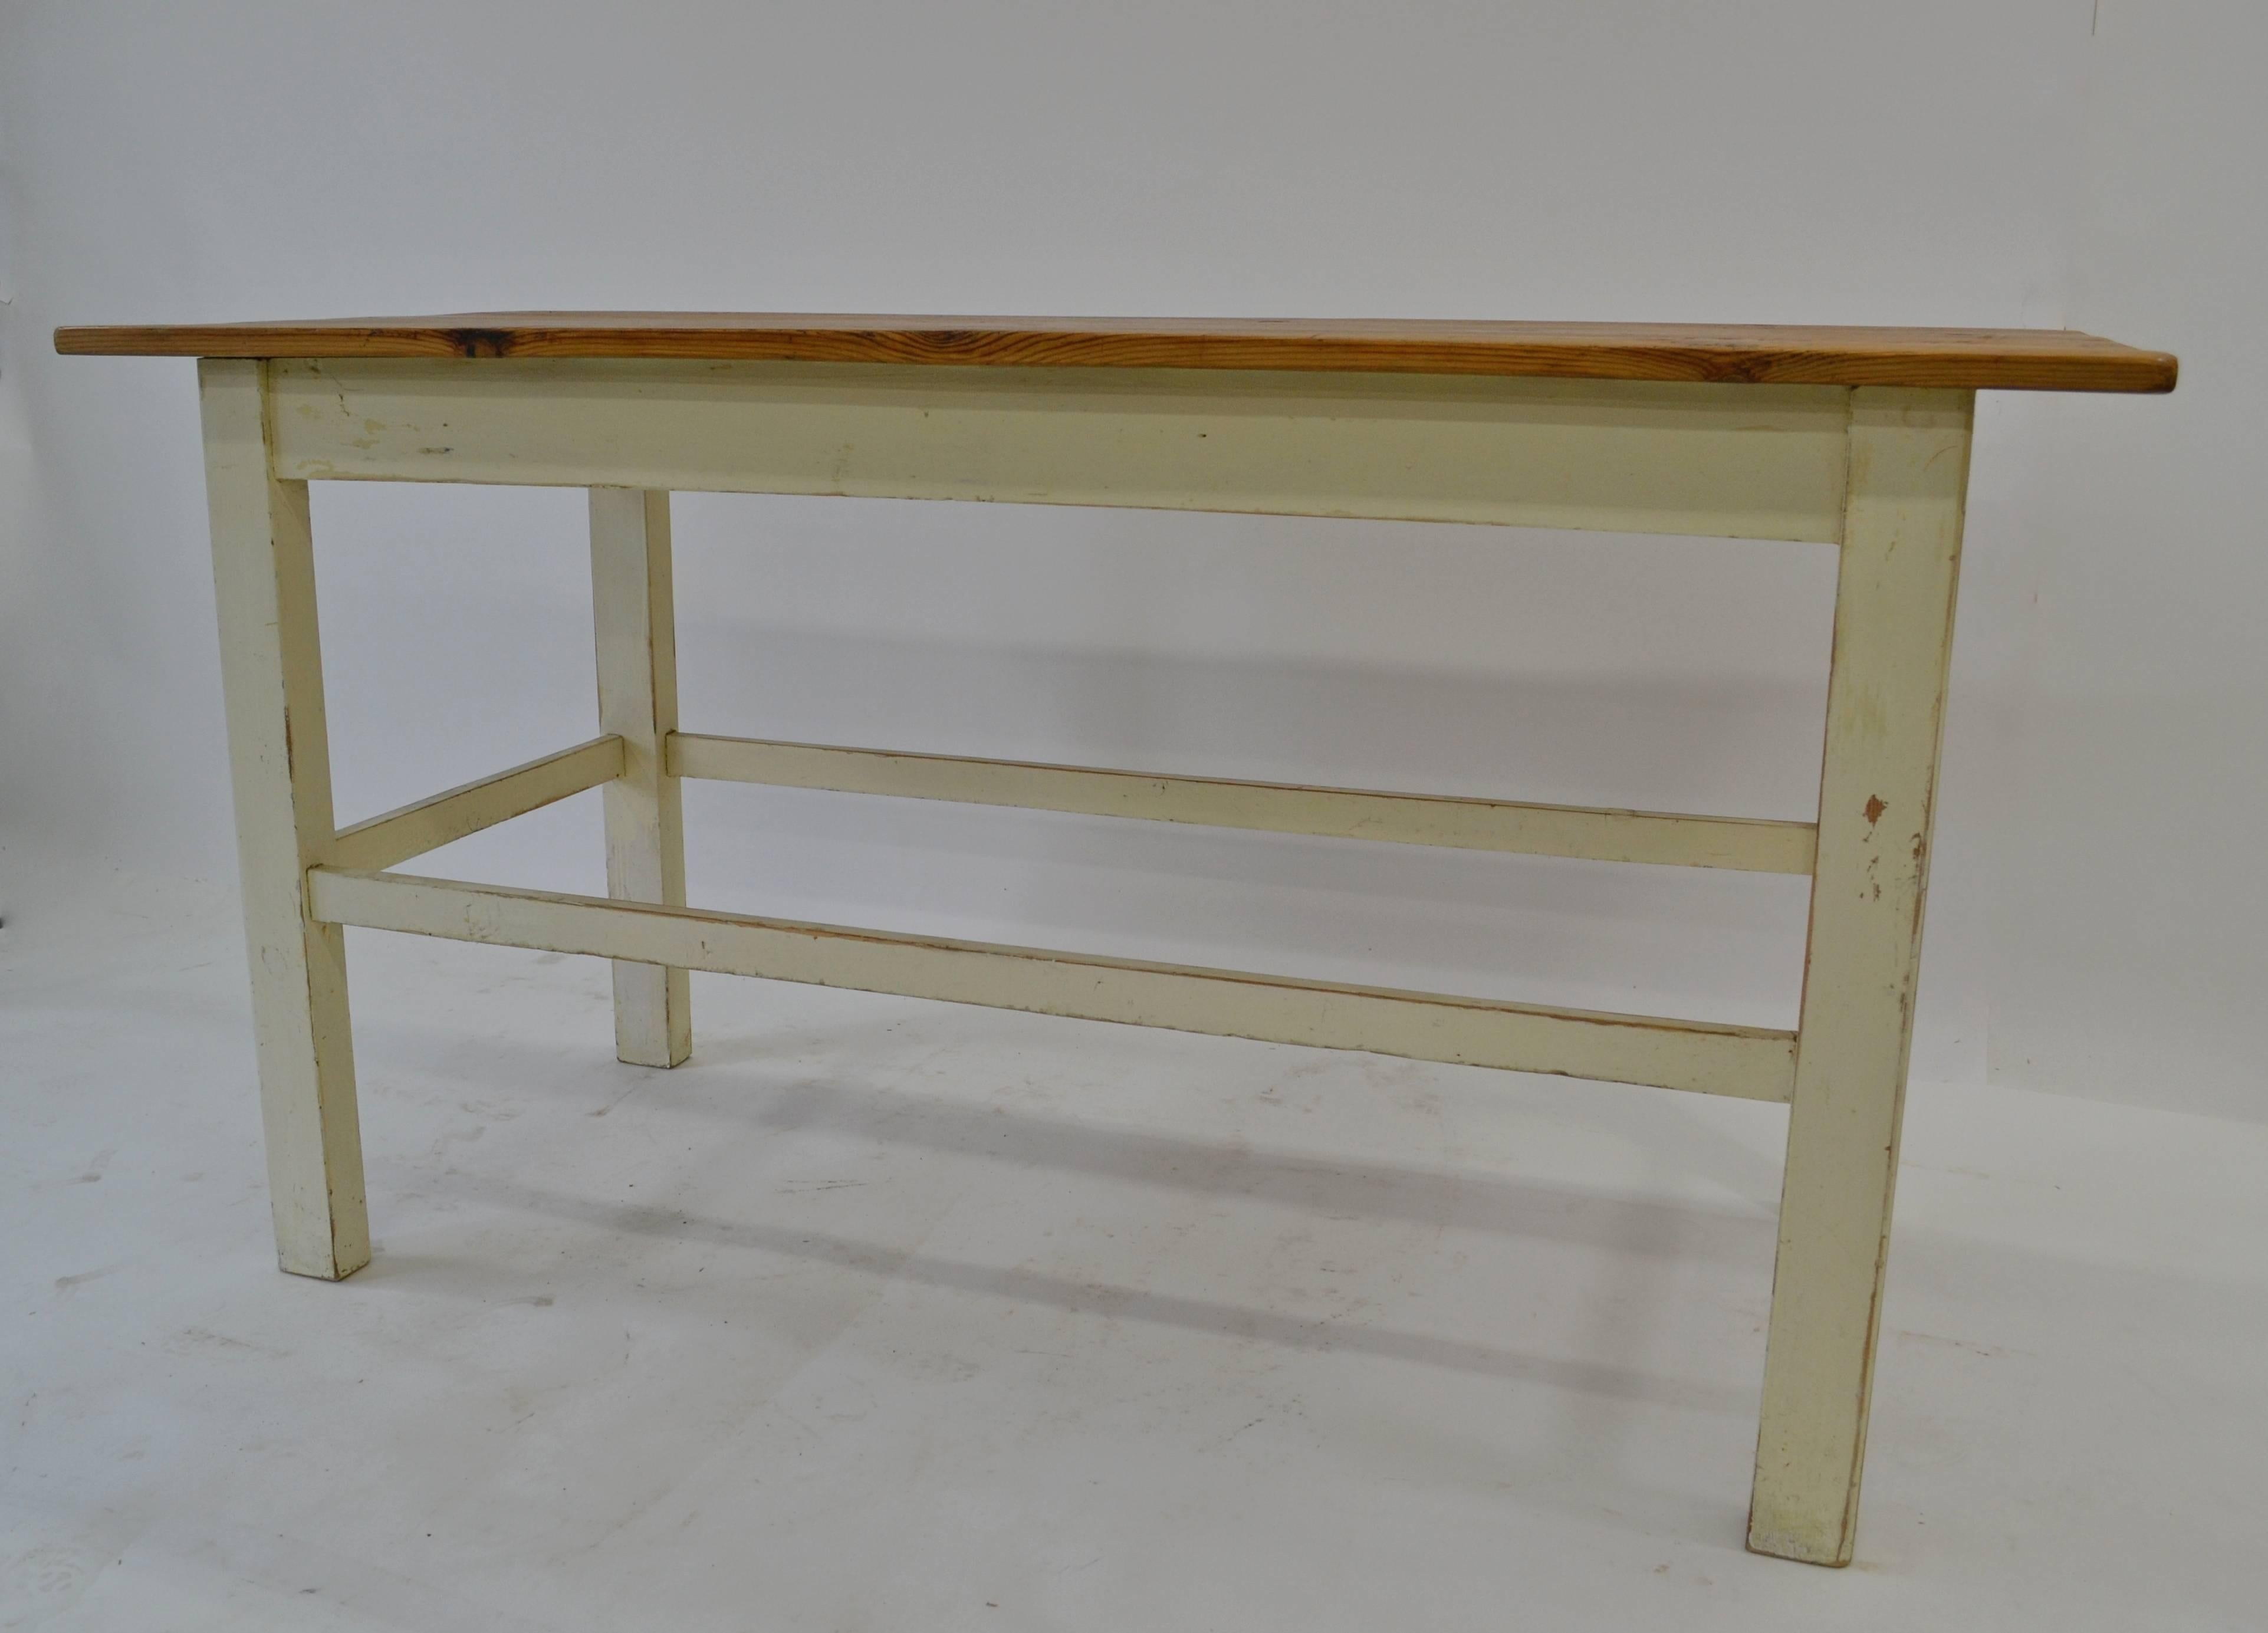 This is a simple but very attractive pine work table, great for a studio or retail setting. The polished pine top has a lovely color and is nicely and naturally distressed through decades of moderate use. The straight legs are gently rounded on